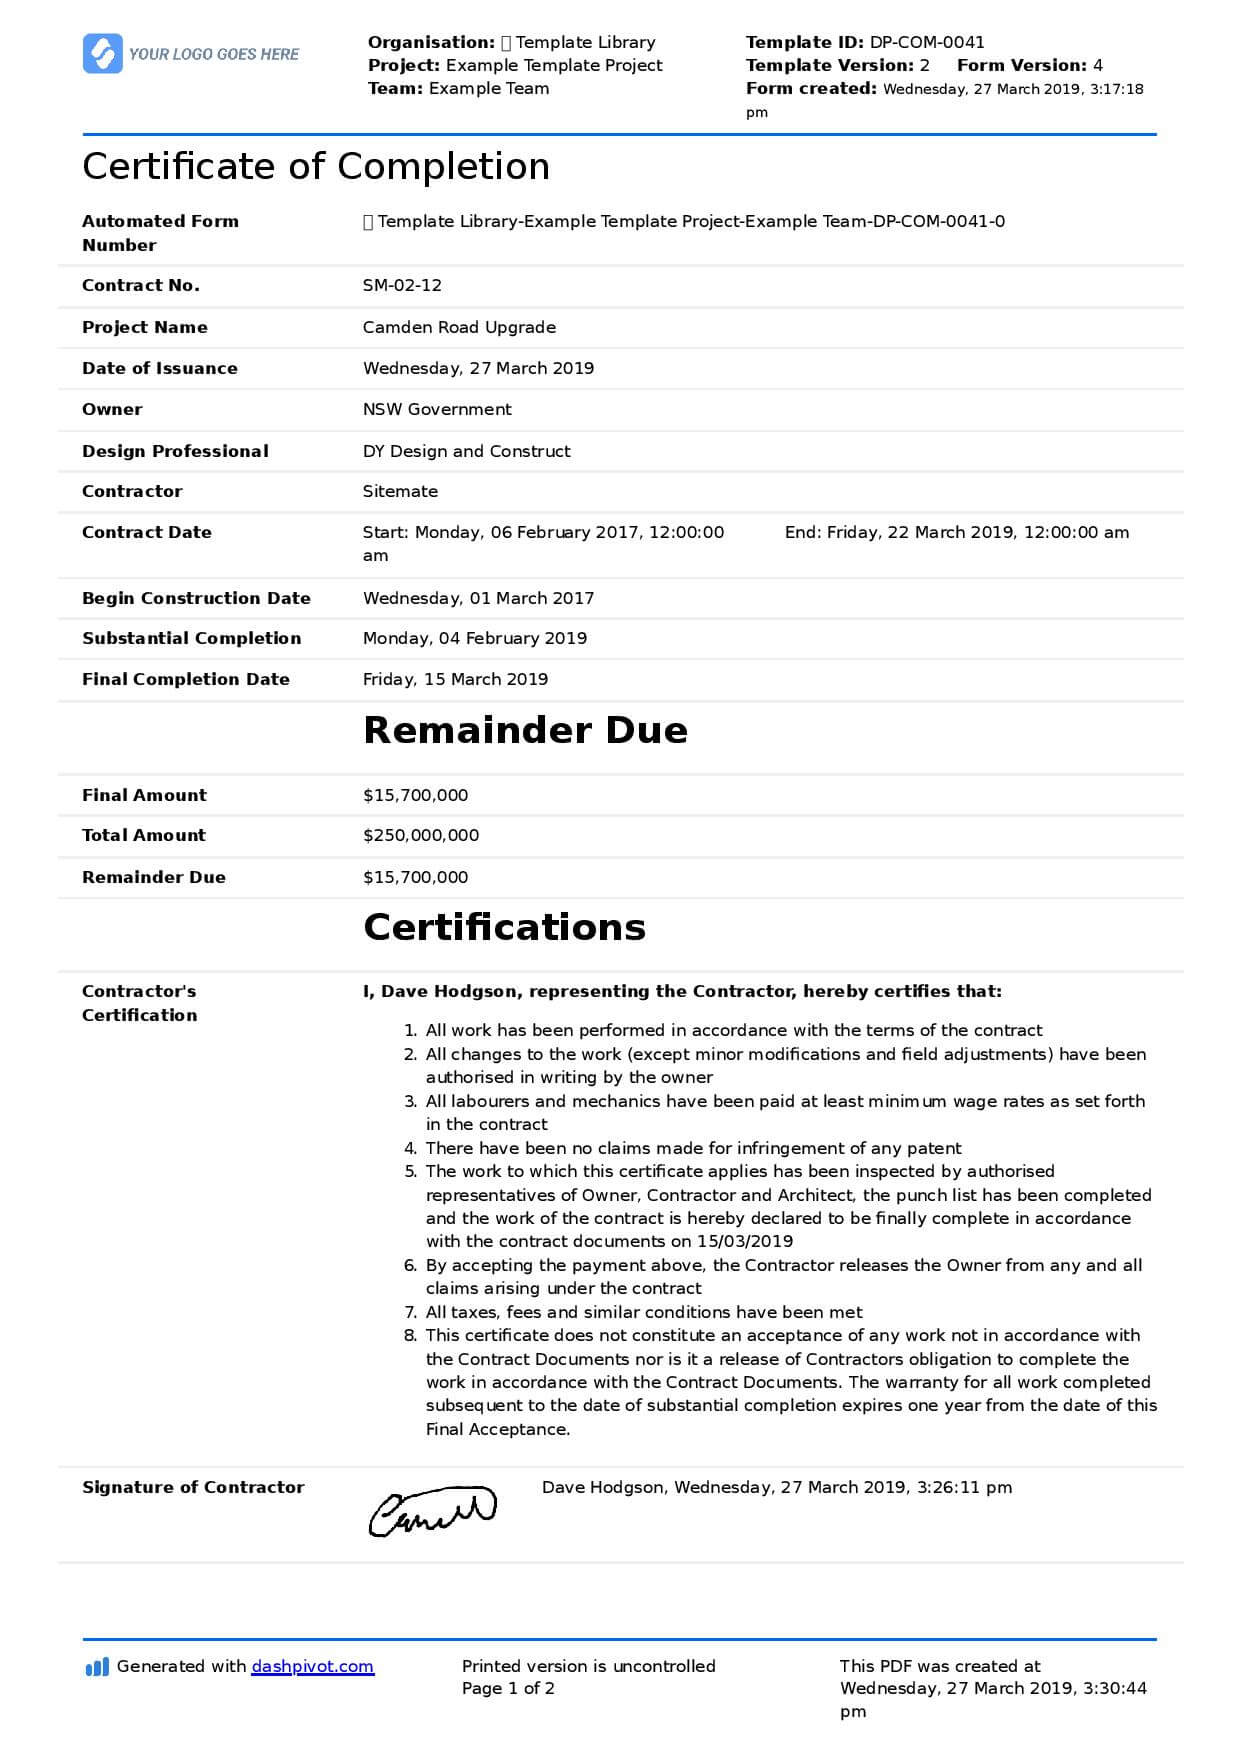 Certificate Of Completion For Construction (Free Template + Intended For Construction Certificate Of Completion Template